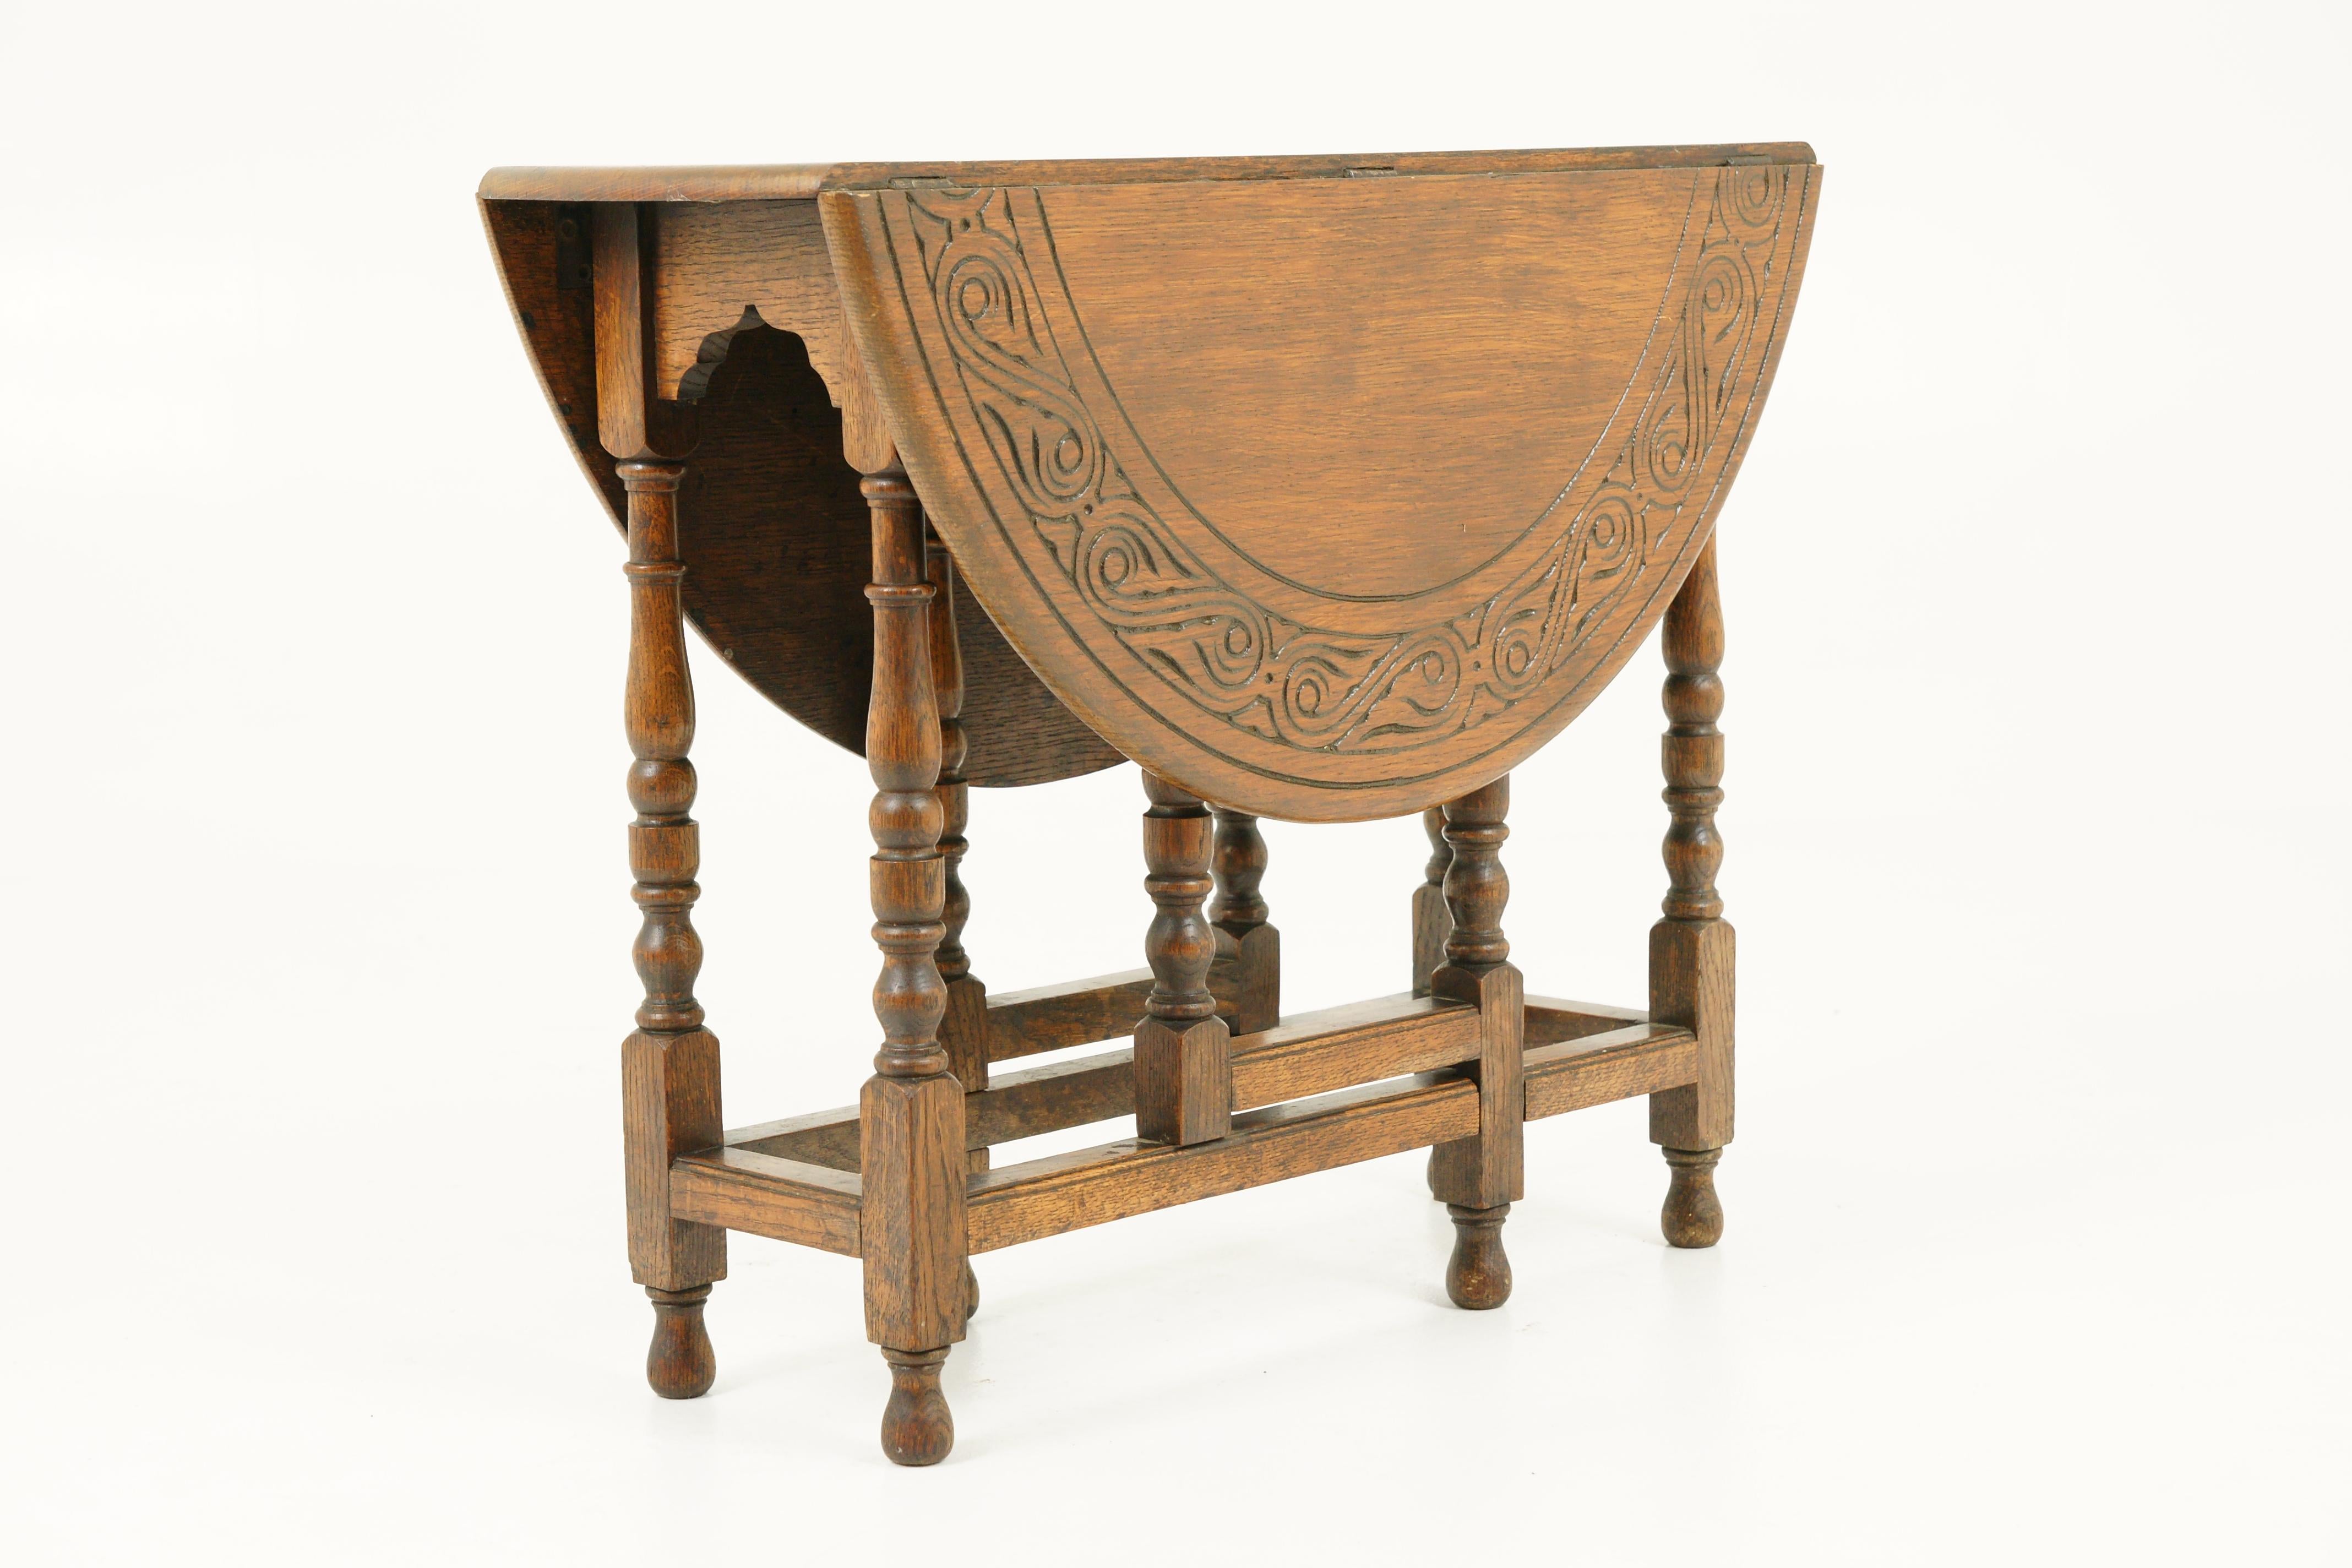 Hand-Crafted Antique Gateleg Table, Carved Drop Leaf Table, Scotland 1930, B1717